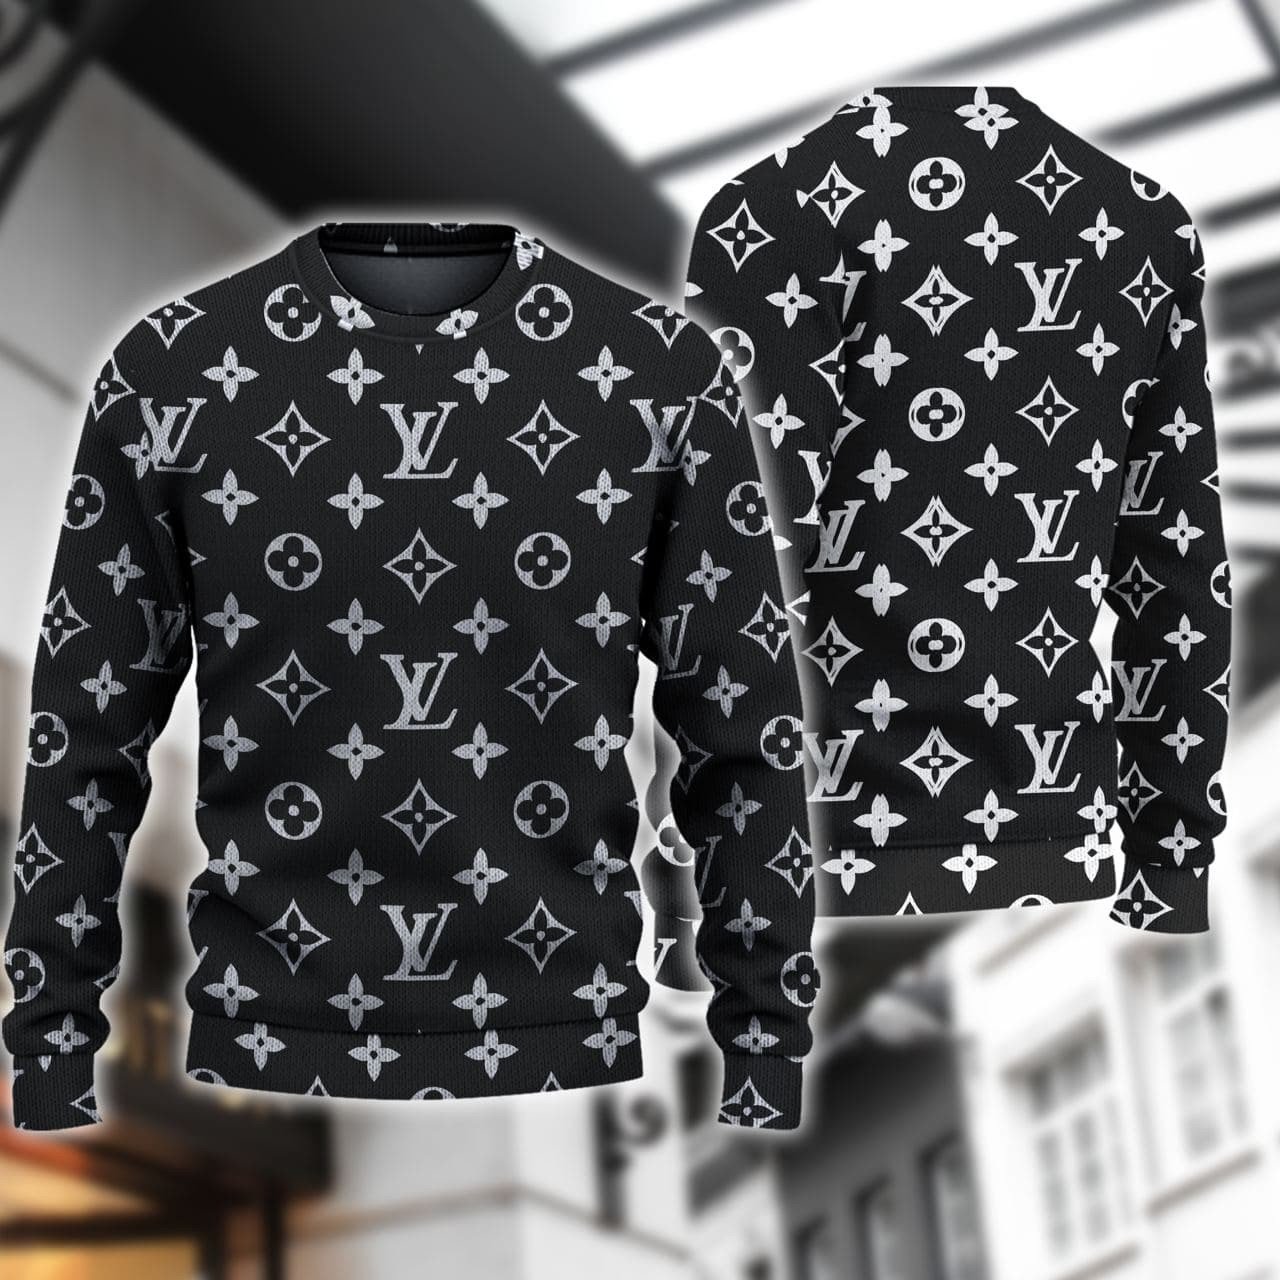 BEST Louis Vuitton black pattern ugly Christmas sweater 5